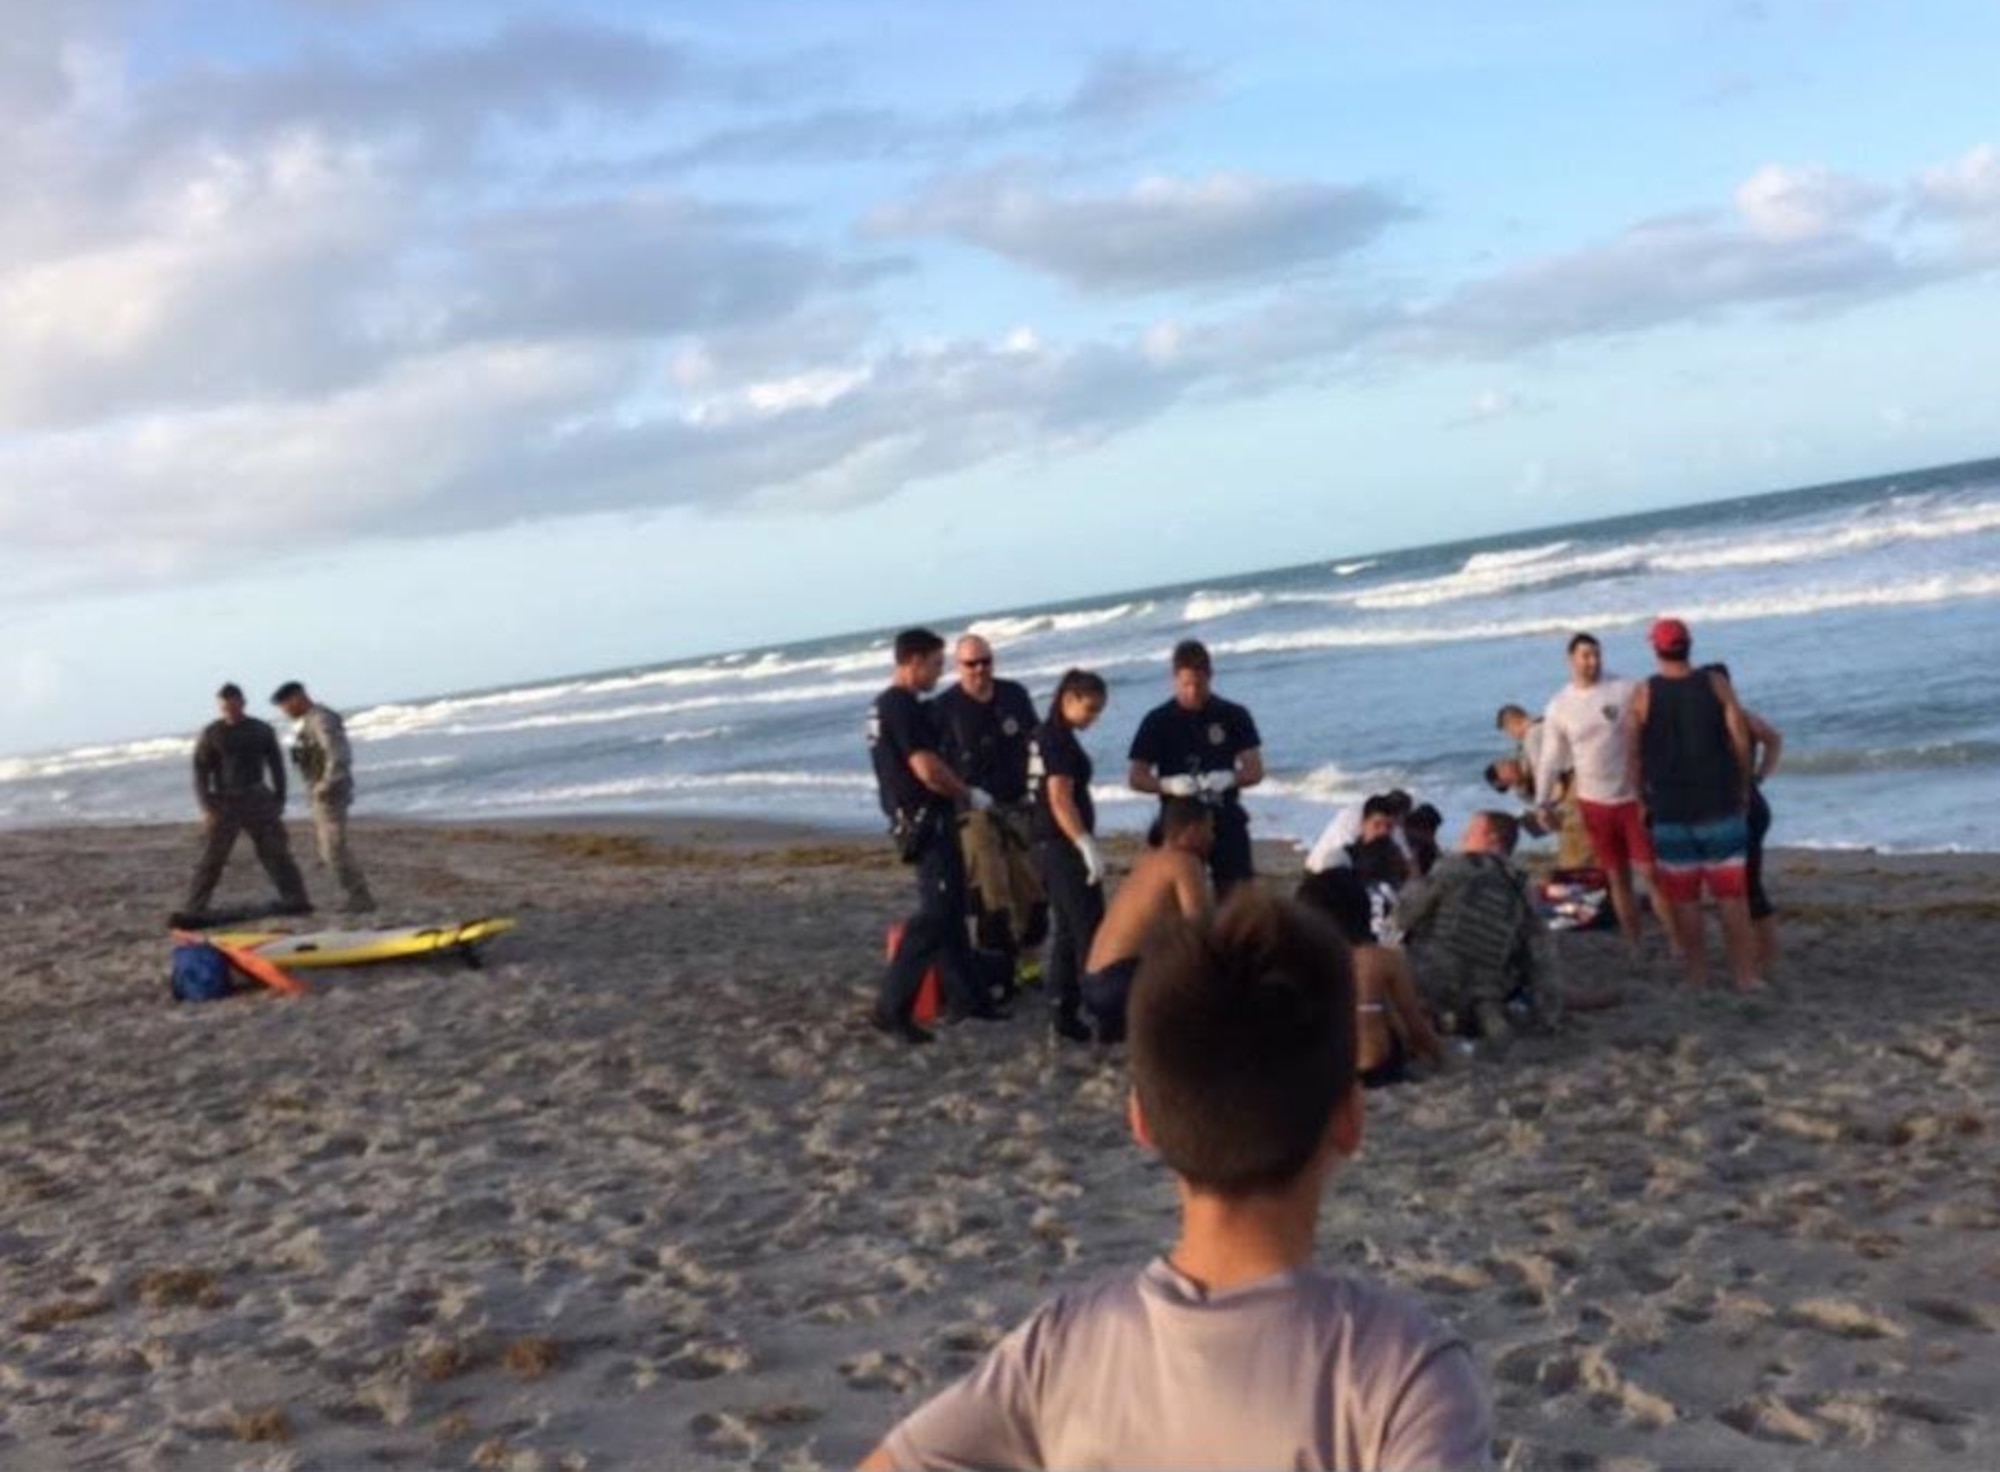 While surf fishing off the beach at Patrick Air Force Base, Florida, Tech. Sgt. Shaun Hartman risked his life to save 8 others who got caught in rip currents April 14, 2017. Three weeks after that harrowing day during the 920th Rescue Wing’s drill training weekend May 7, 2017, Vice Wing Commander Col. P. Brett Howard presented Hartman with the wing commander’s coin at the 308th Rescue Squadron where he serves as a medical logistics technician, for his heroics. 
